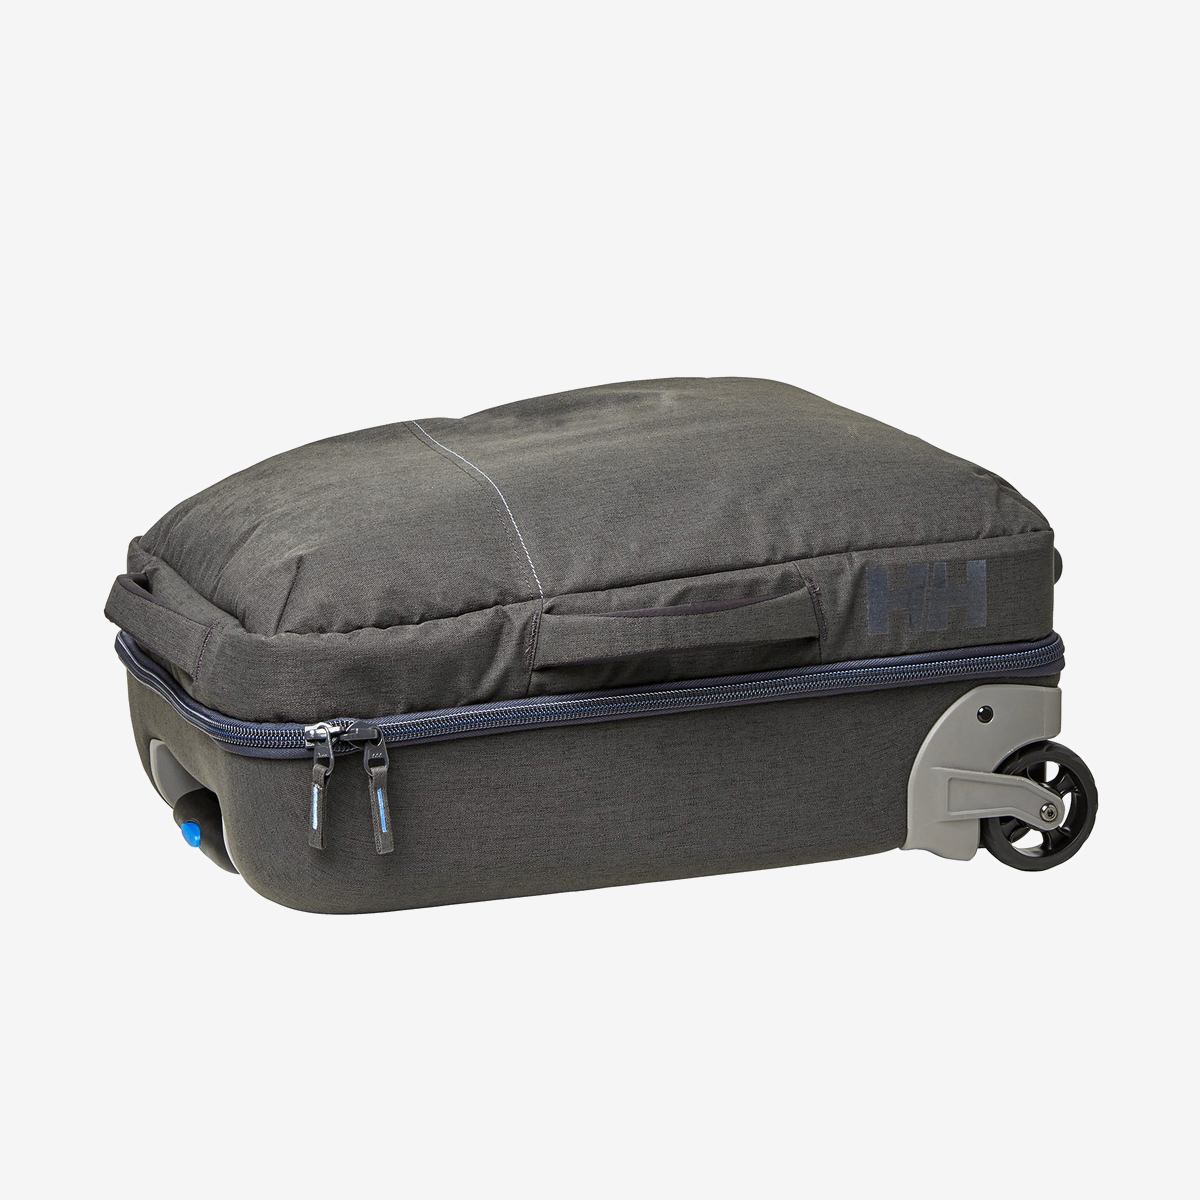 Сумка Helly Hansen EXPEDITION TROLLEY 2.0 CARRY O